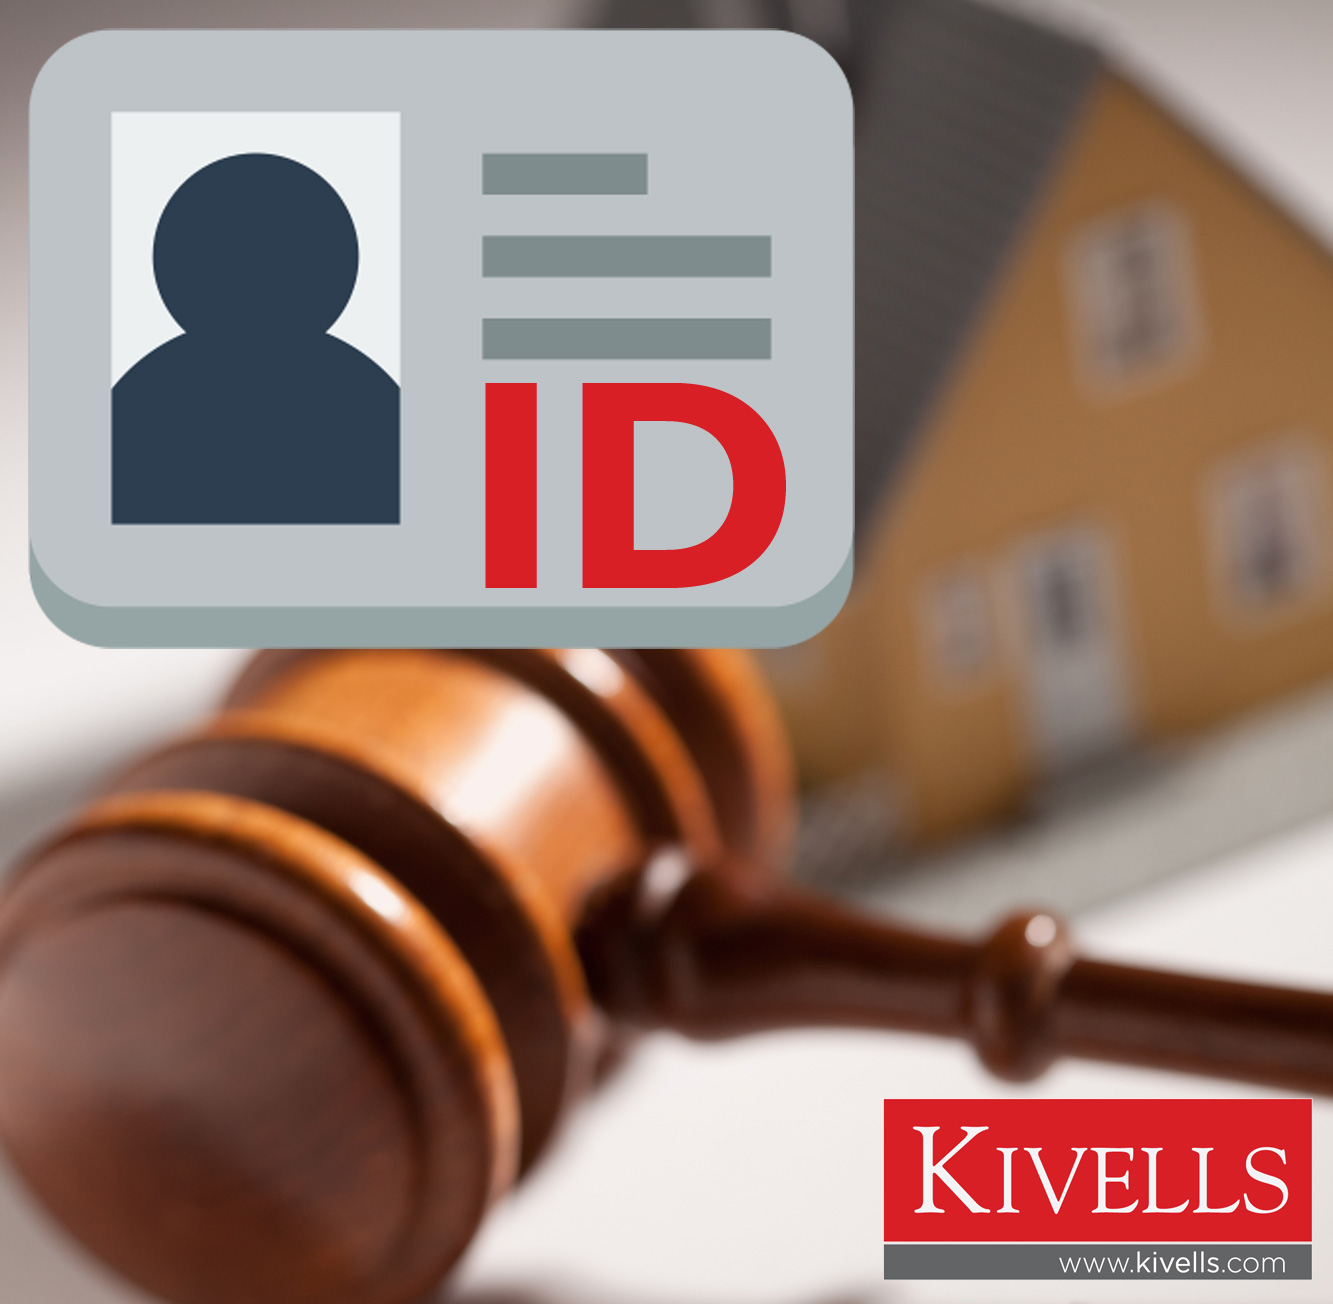 Property auction ID requirements